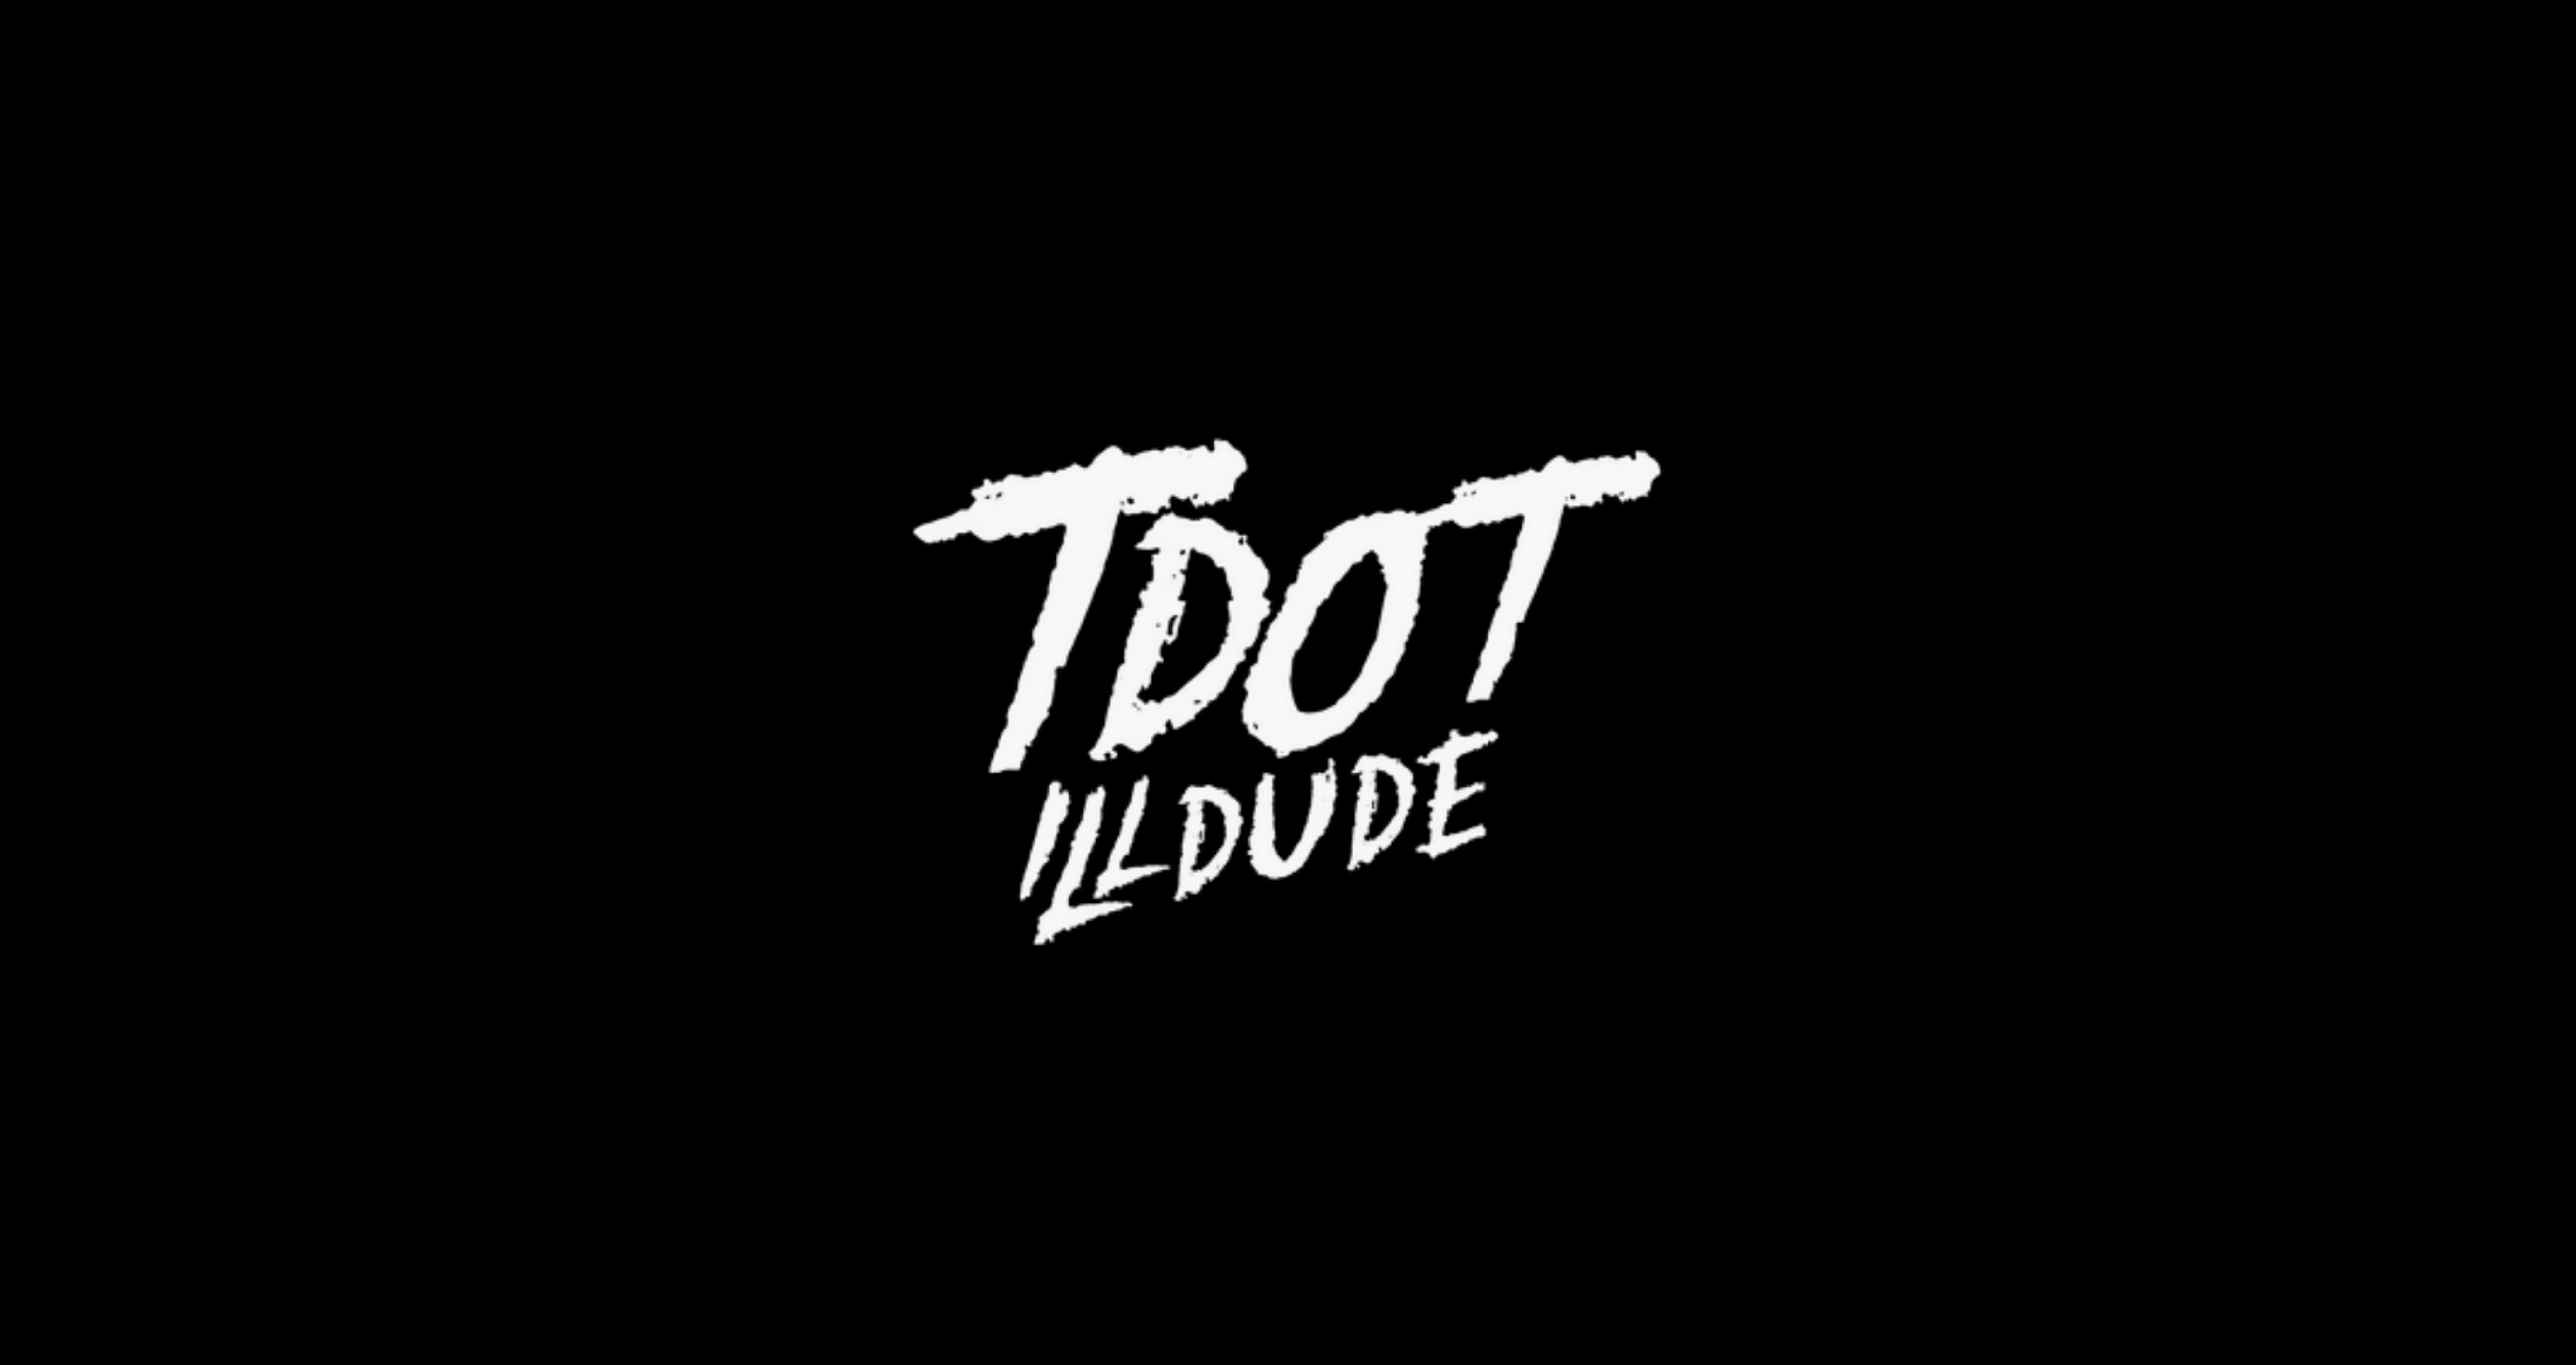 Artist TDot uses revenue sharing to promote his song title